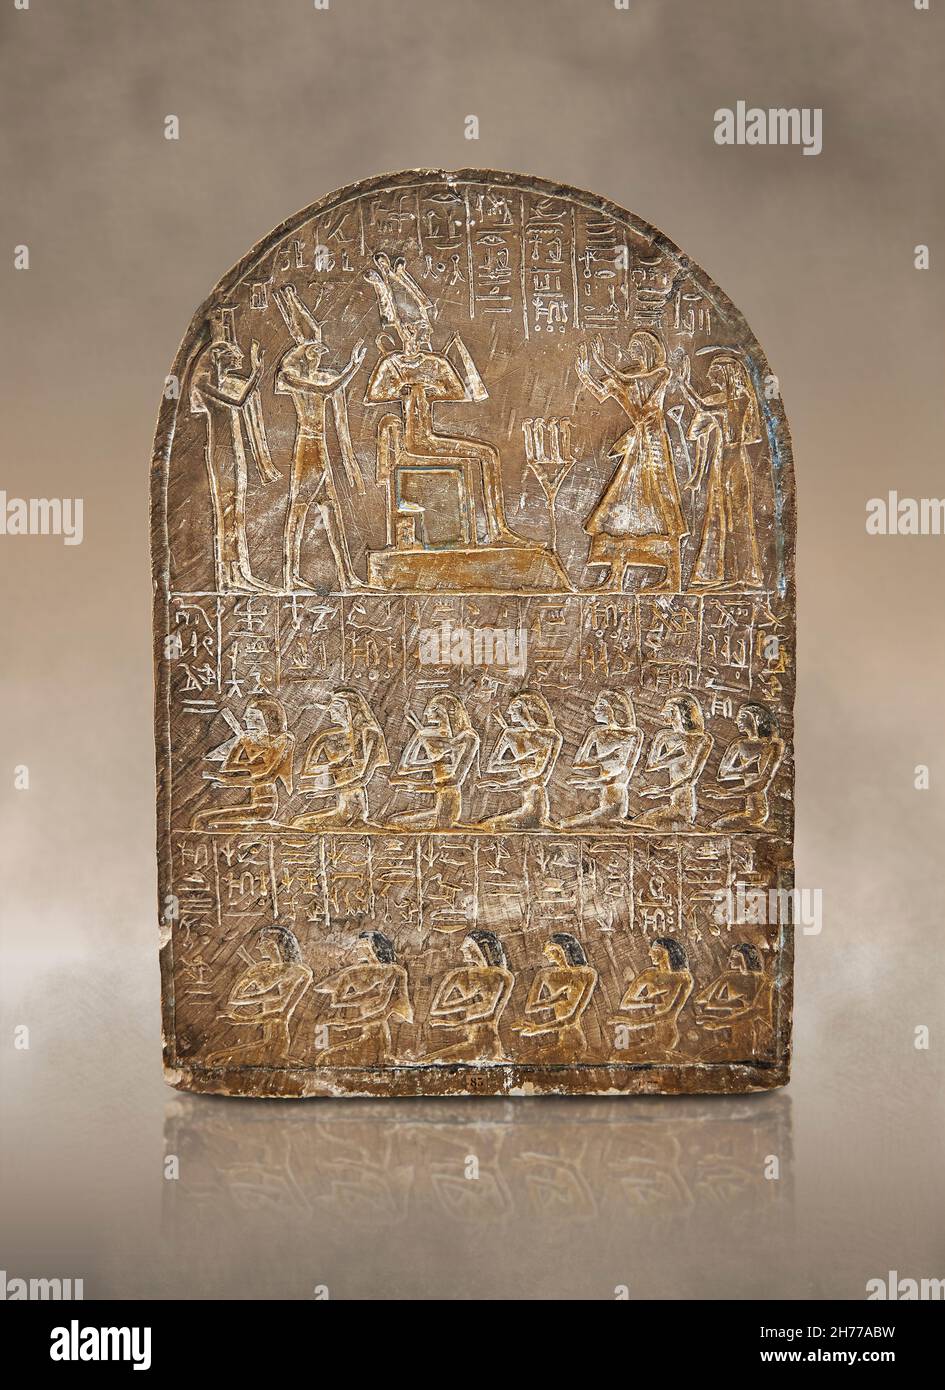 Ancient Egyptian stele of Nefer-Ptah, 1307-1196 BC, 19th Dtnasty, Abydos. Museum of Fina Arts Lyon inv H1381. Stele consecrated to the Adybenian gods Stock Photo